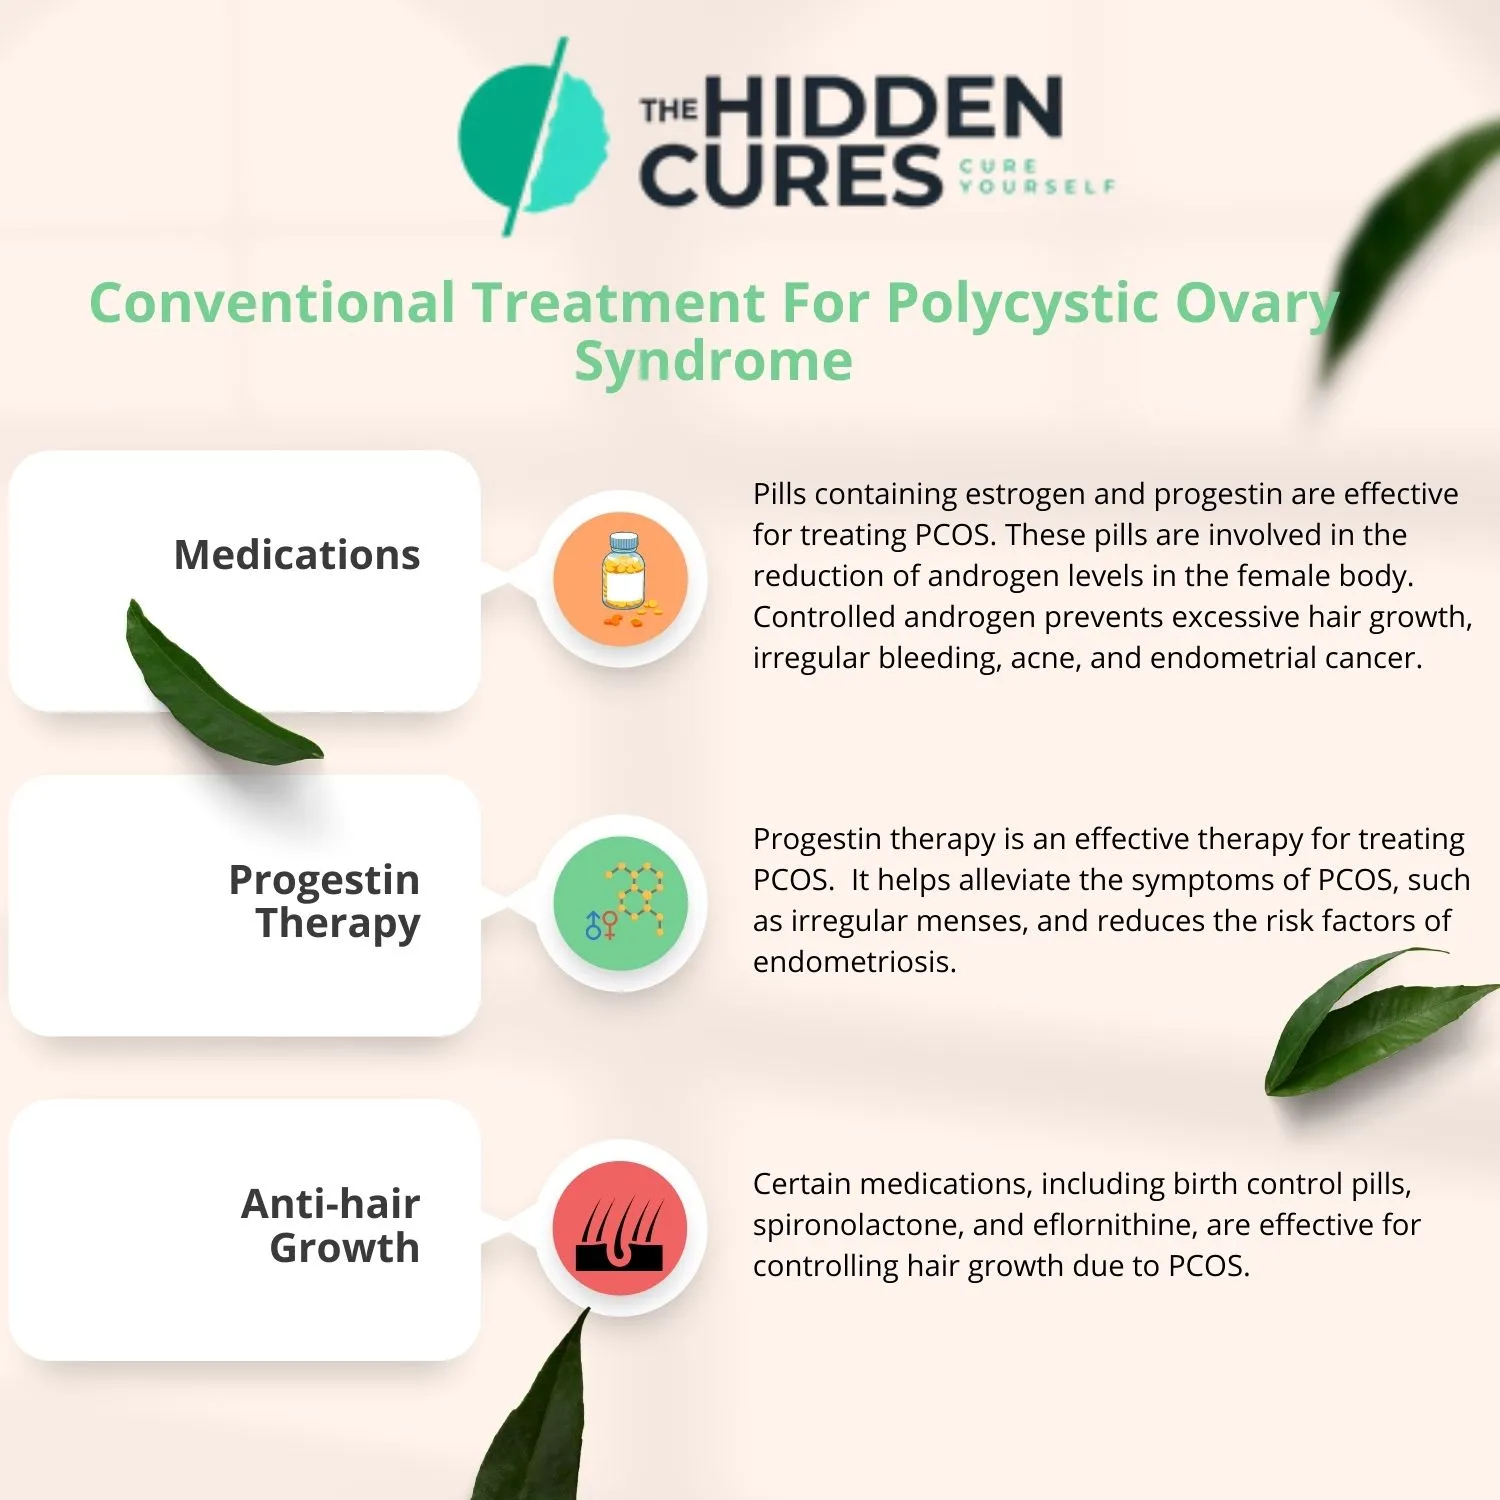 Conventional Treatment For Polycystic Ovary Syndrome